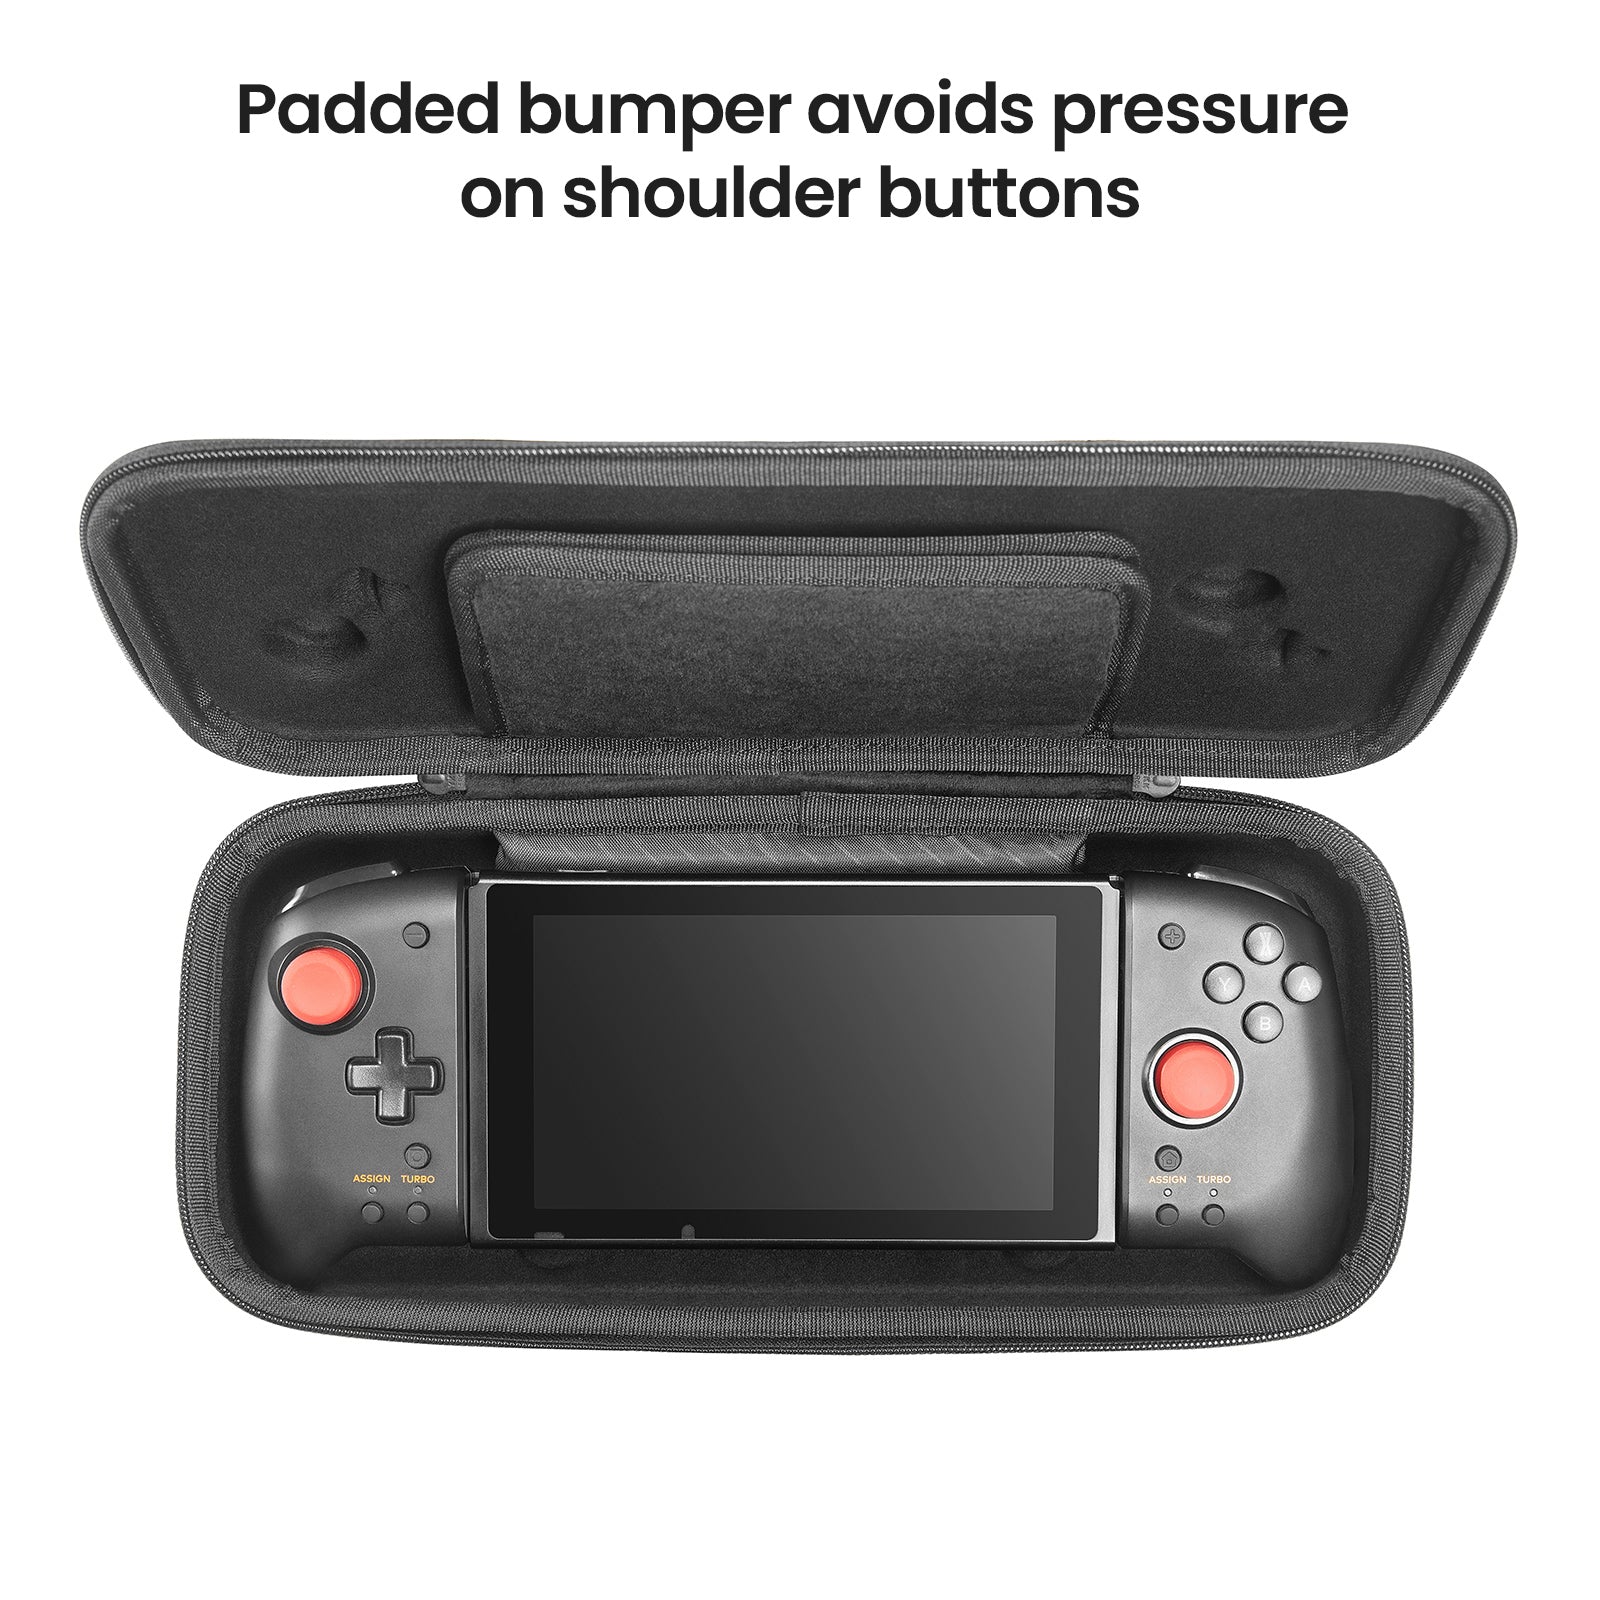 Hori Split Pad Pro Case - ZBRO Hard Shell Case for Nintendo Switch Split  Pad Pro Controller - Support 20 Game Slots / Button Protection/ Large